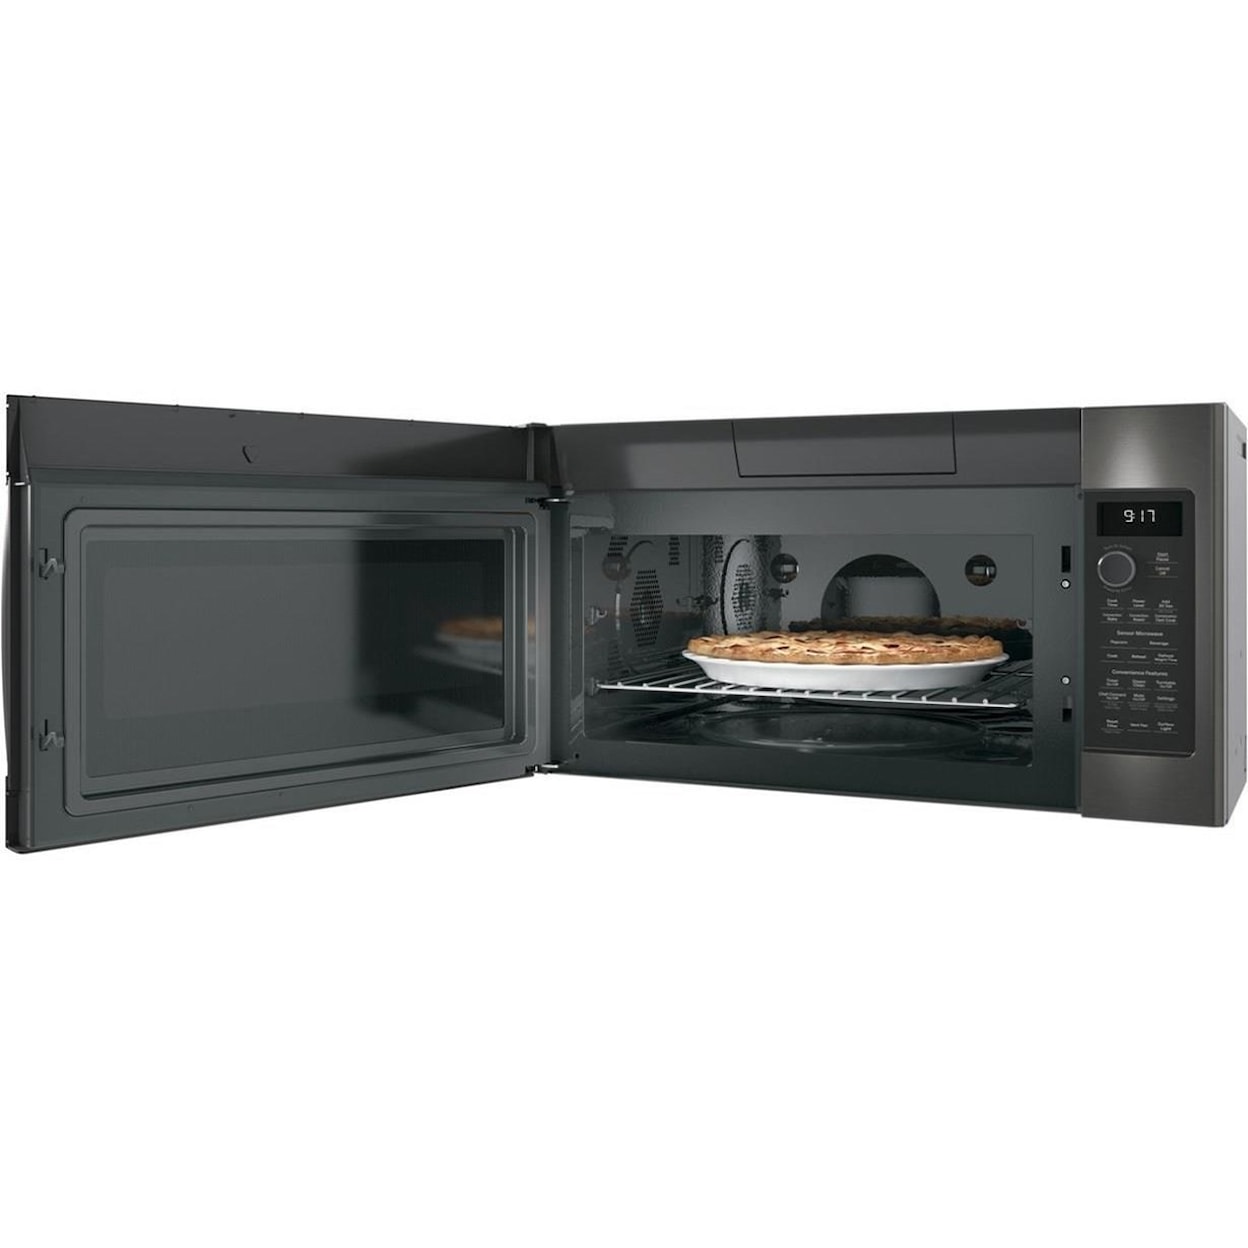 GE Appliances GE Microwaves GE Profile™ 1.7 Cu. Ft. Convection Microwave